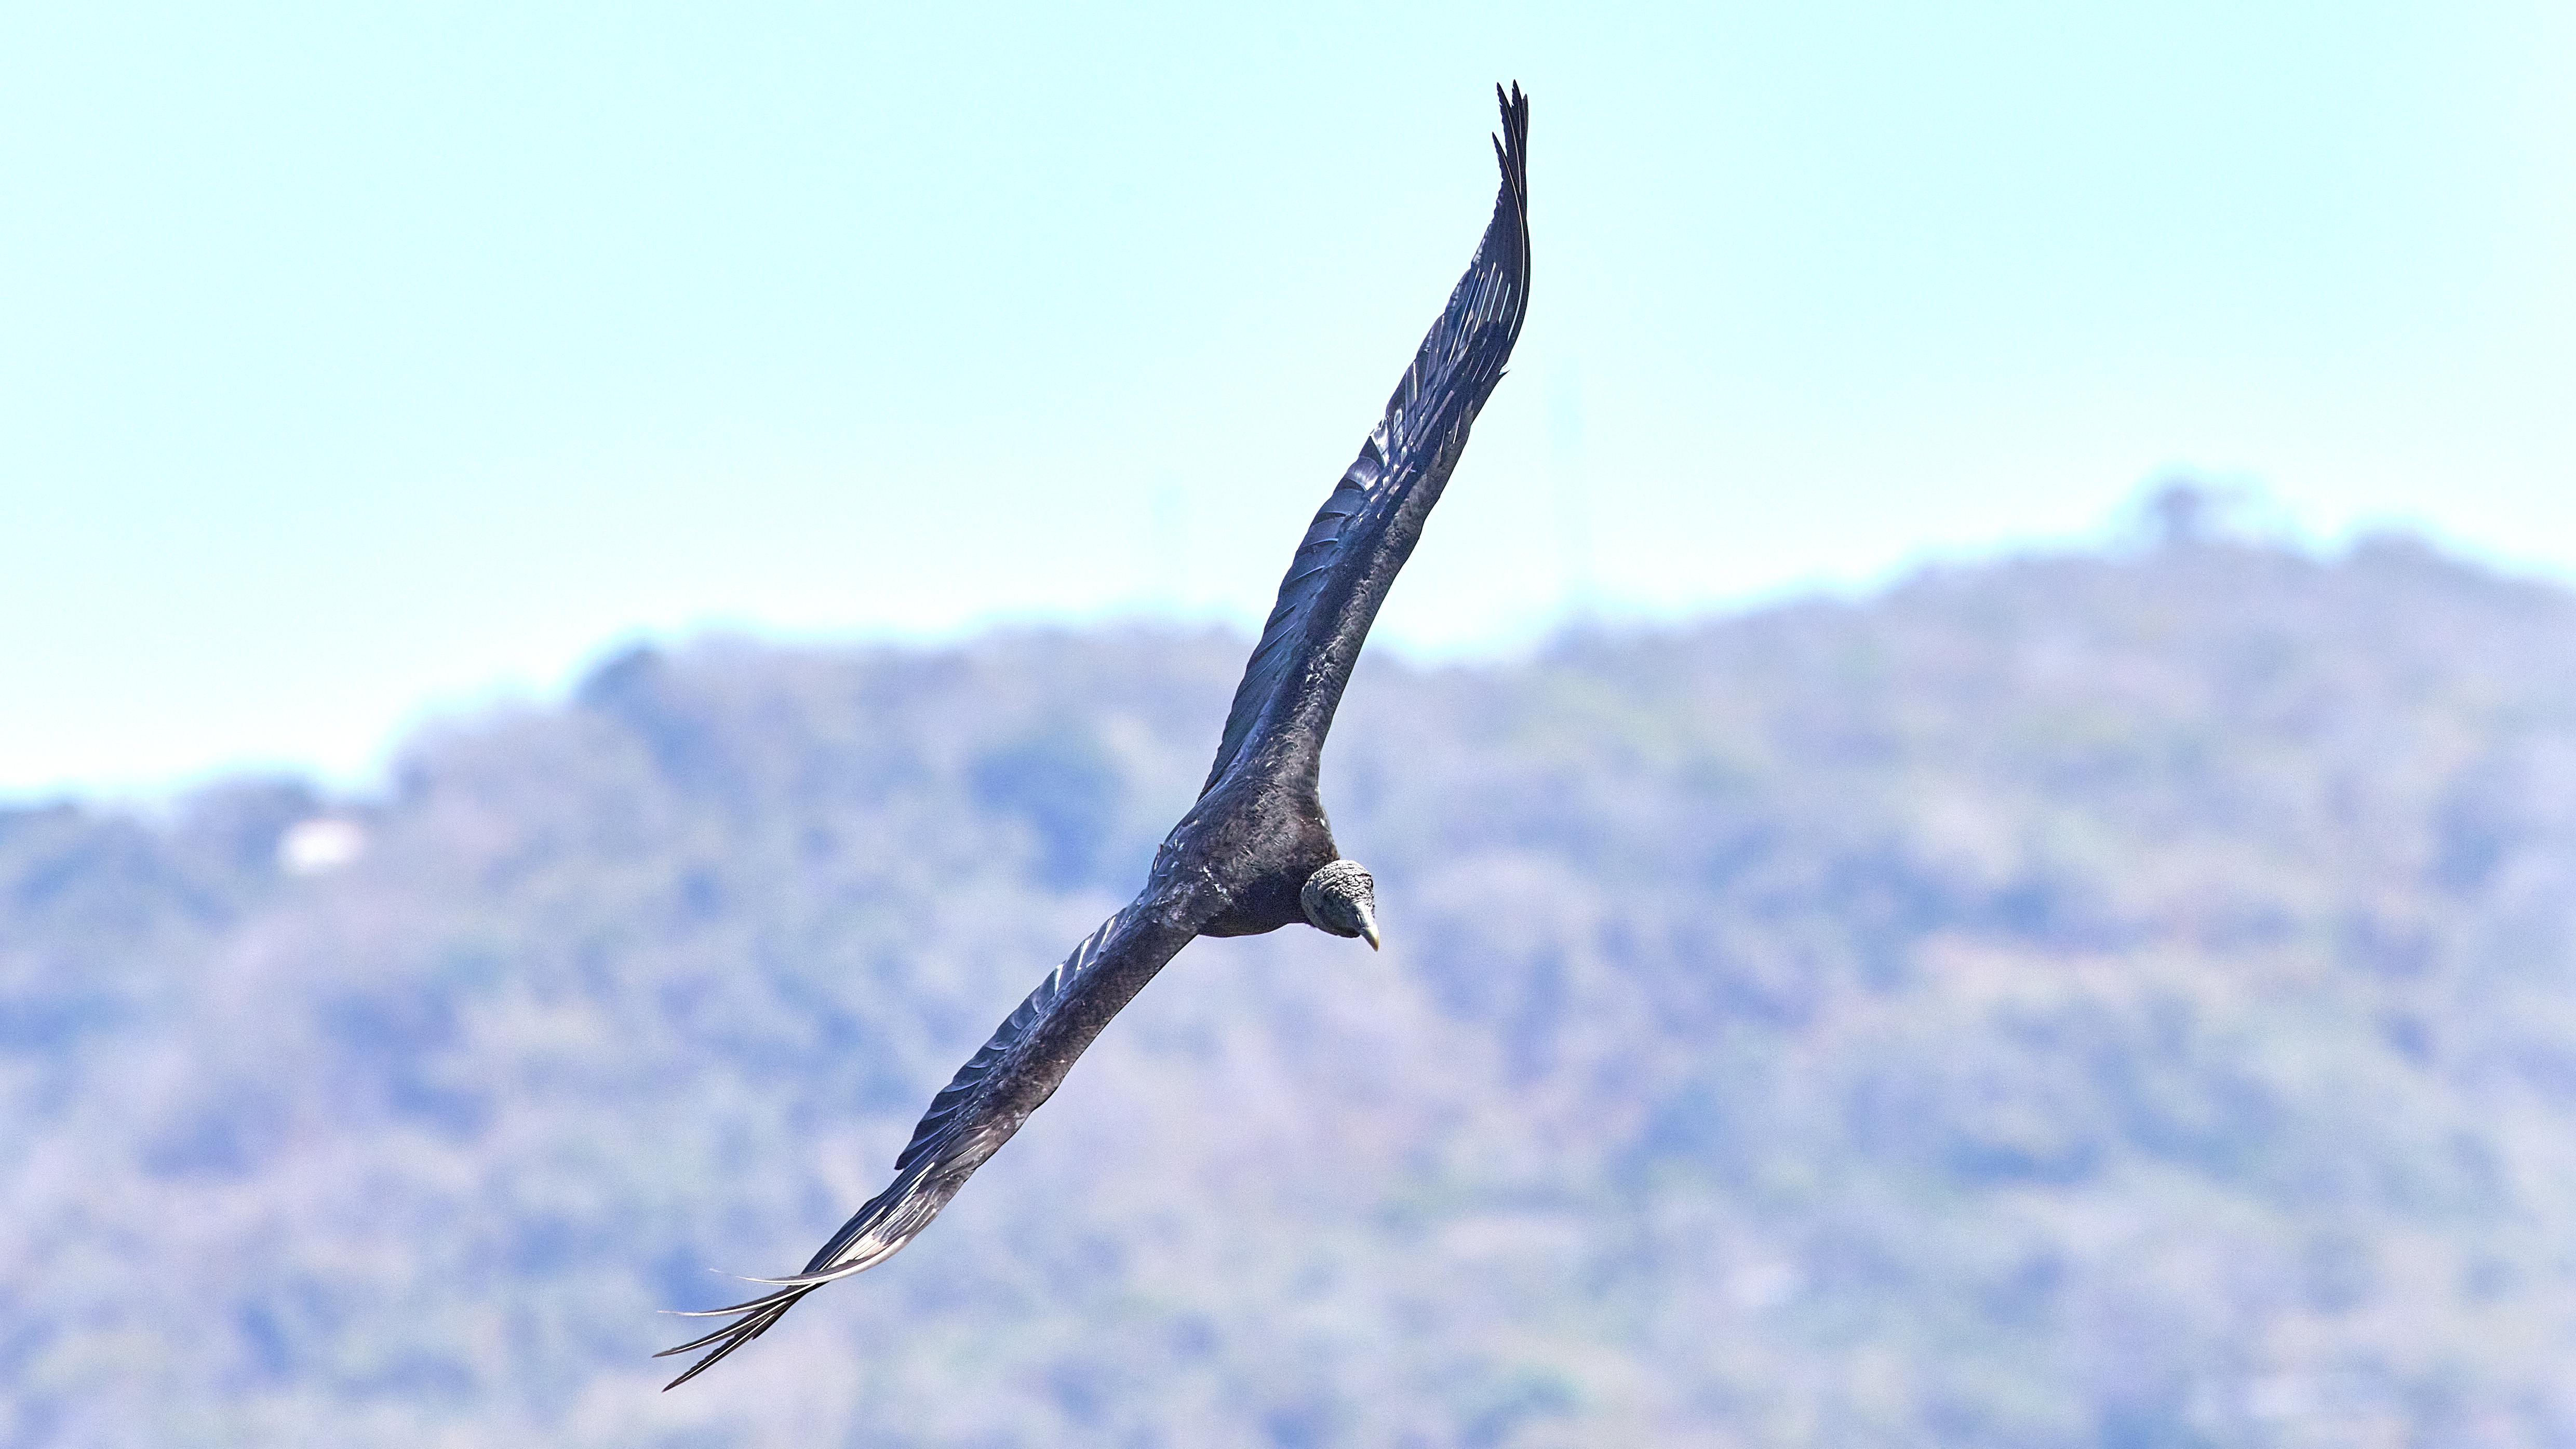 Black vulture, ubiquitous, hunts at great heights by sight - image 18